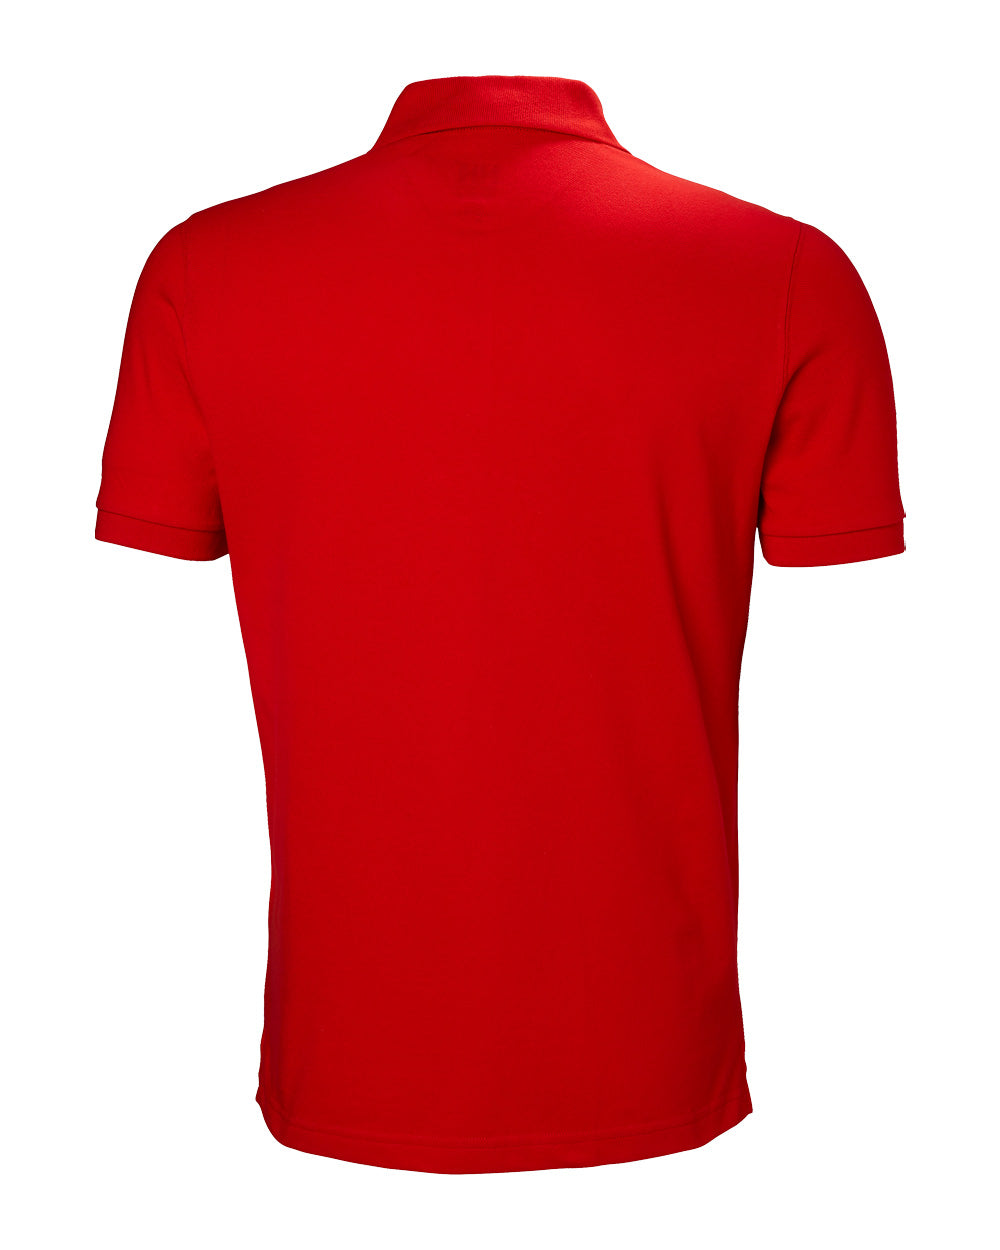 Alert Red coloured Helly Hansen Polo Shirt on White background 